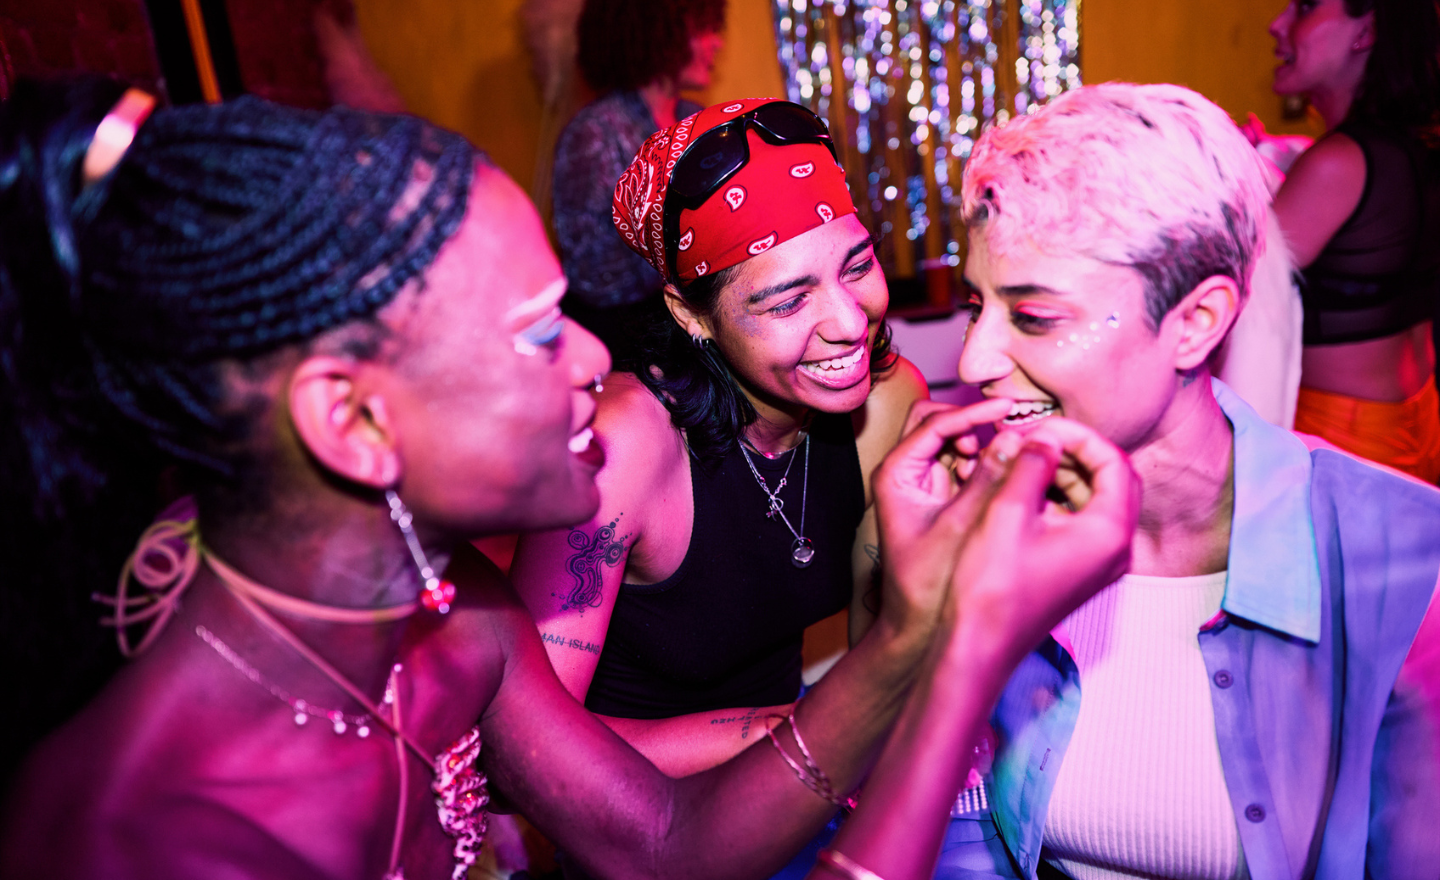 We Asked LGBTQIA+ People Where You Should Look to Find Your Next Date